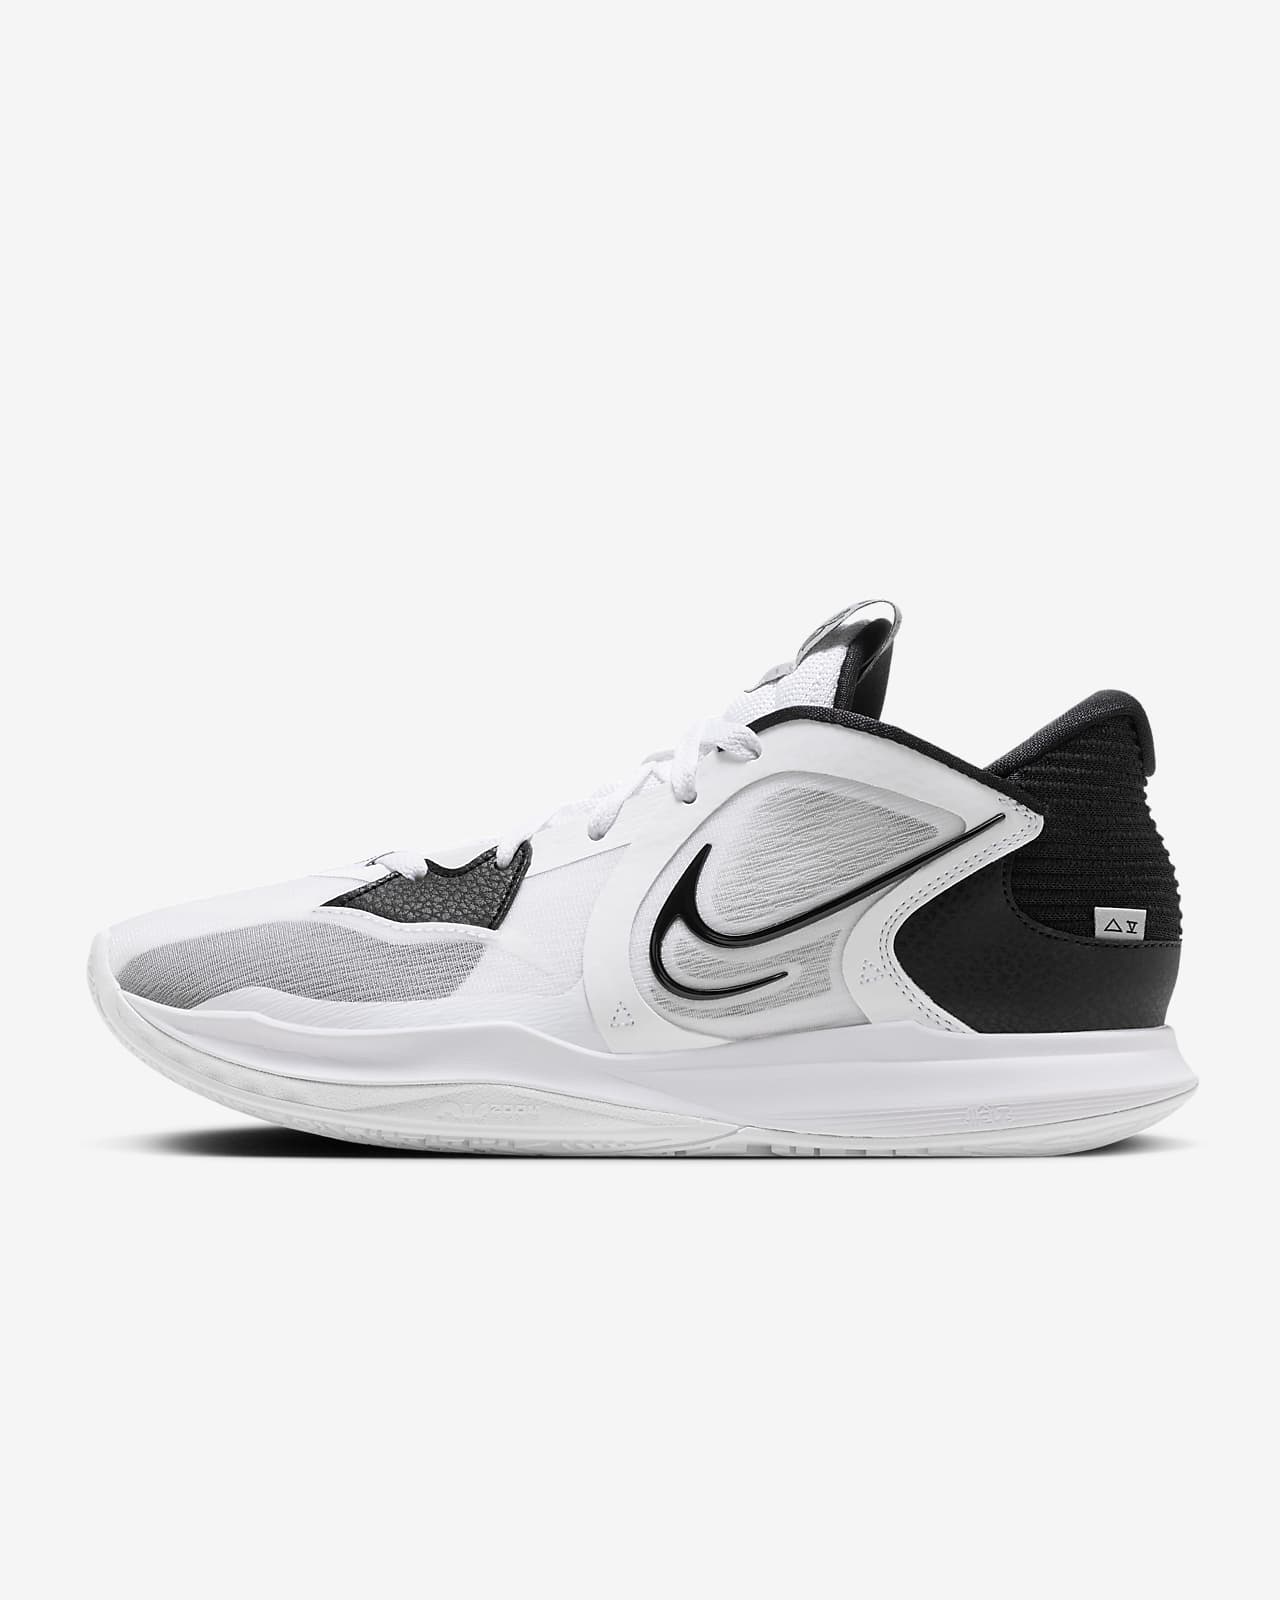 Kyrie Low 5 Basketball Shoes. Nike PH